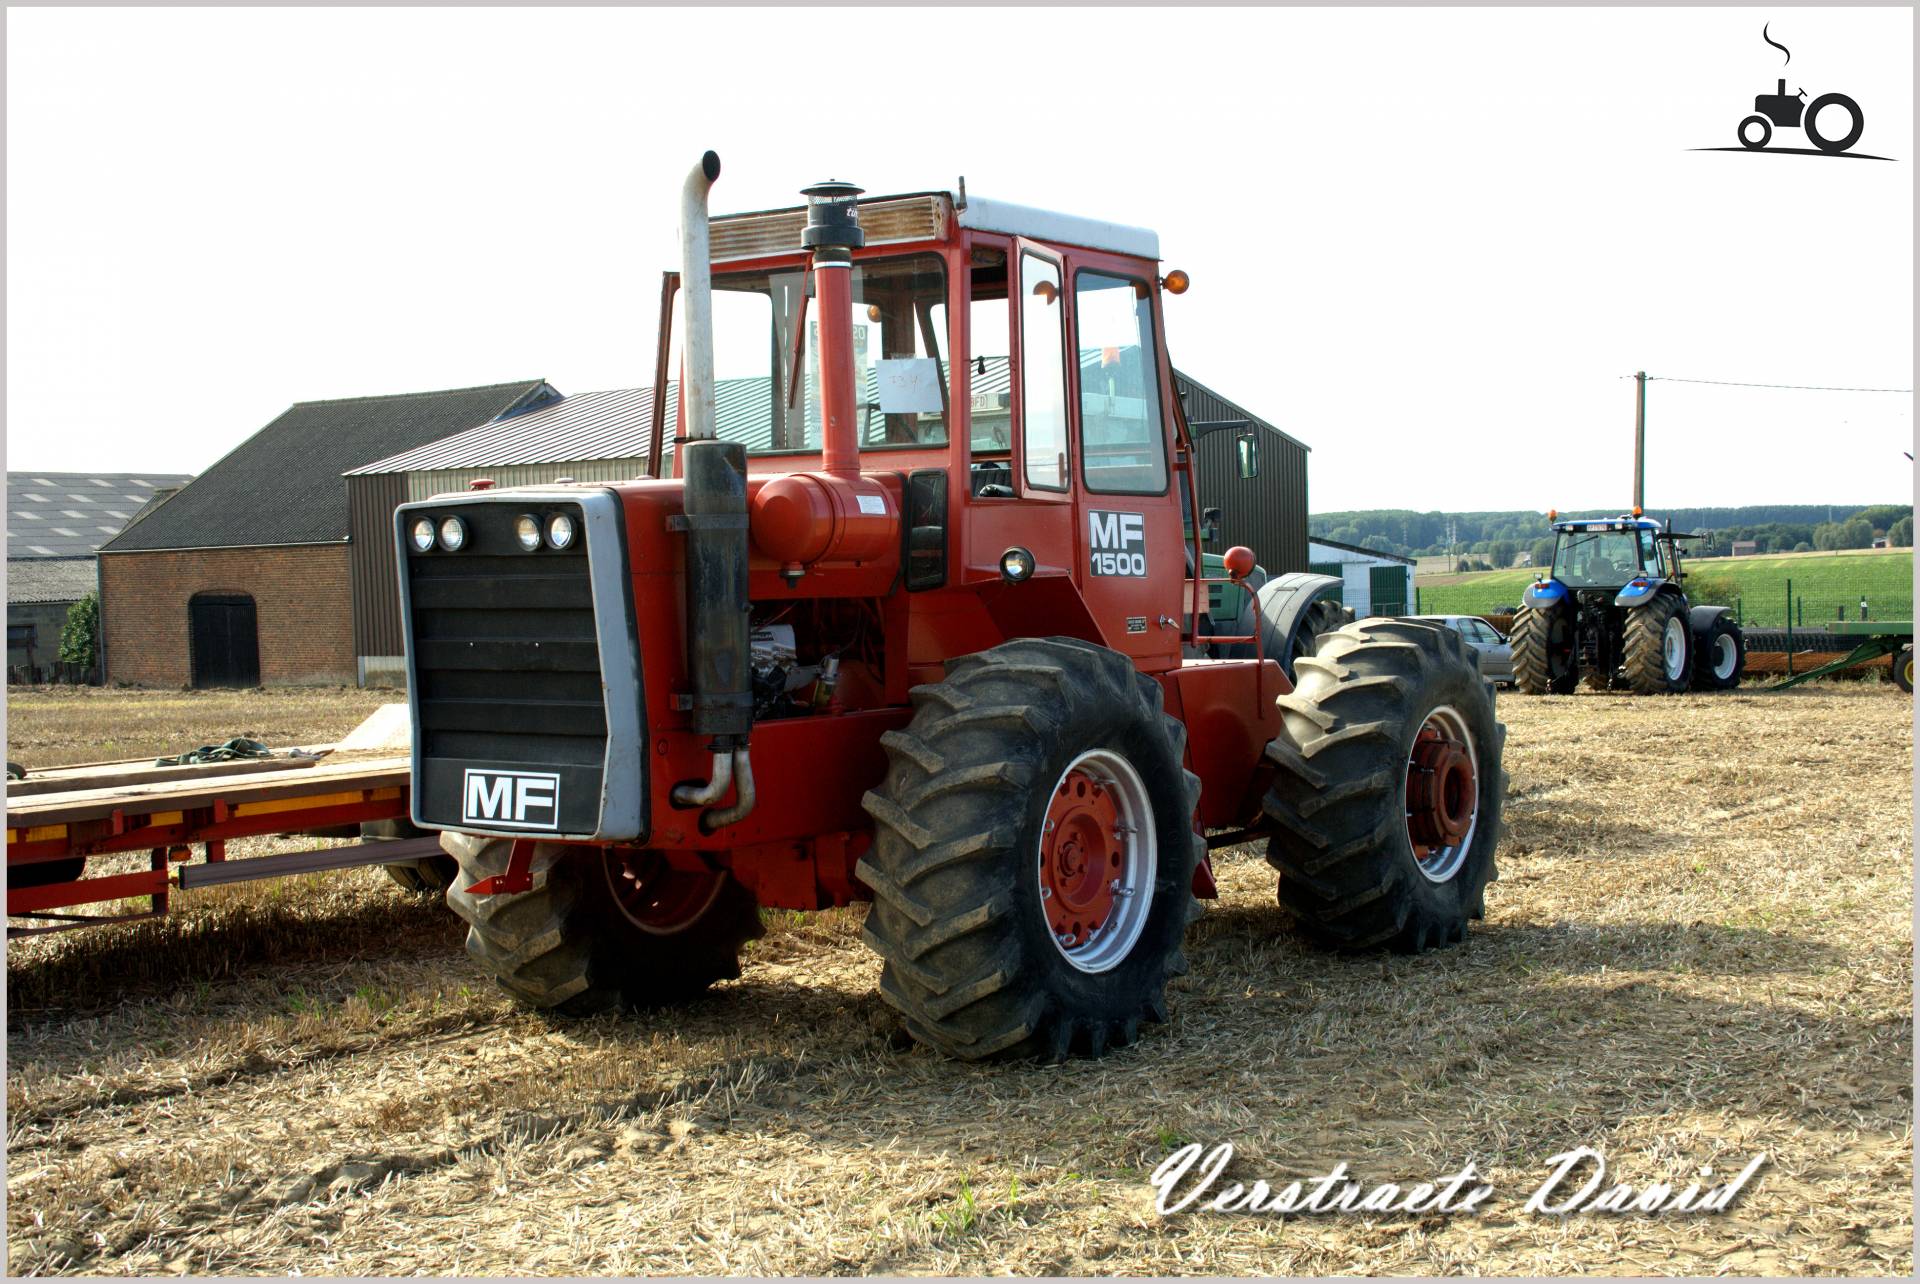 Massey Ferguson 1500 Specs and data - Everything about the Massey ...